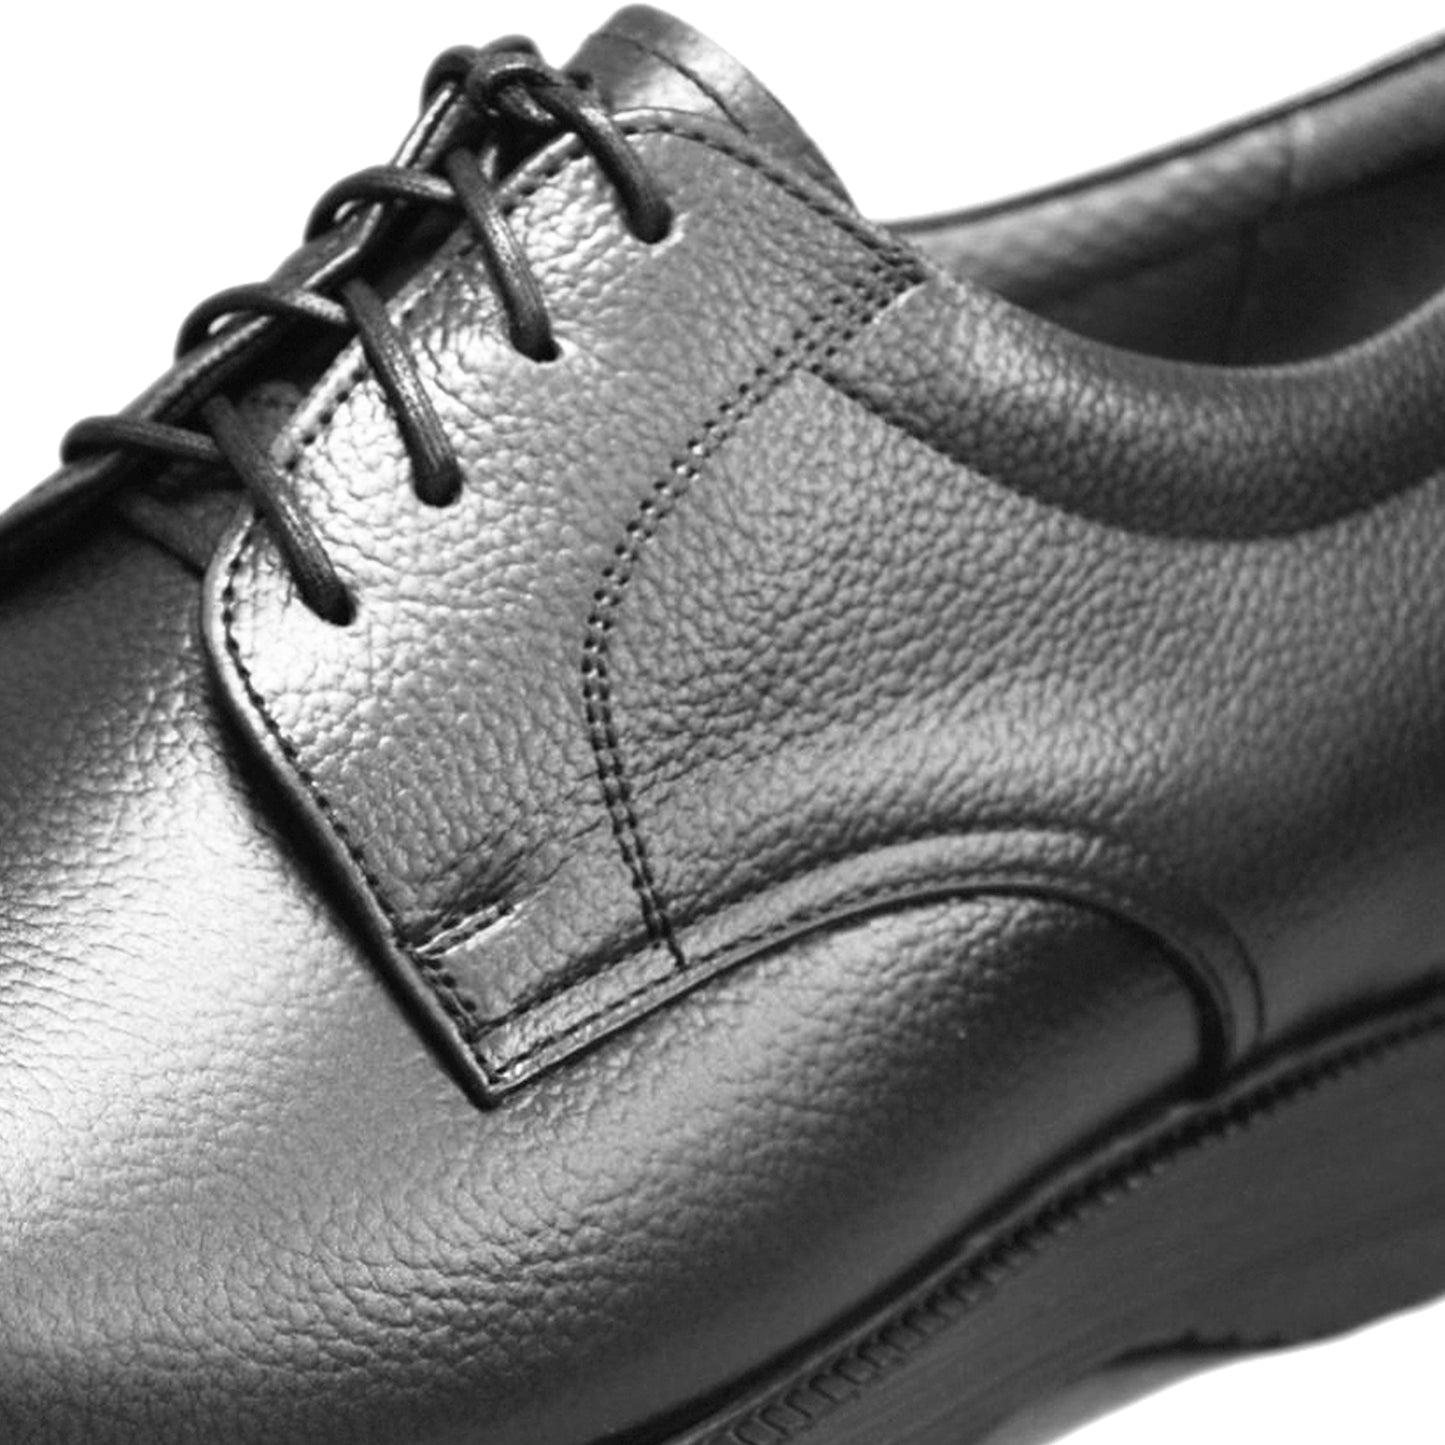 Men's Elevator Shoes Height Increasing 2.2" Taller Derby Plain Toe Lace Up Wide Genuine Leather No. 911